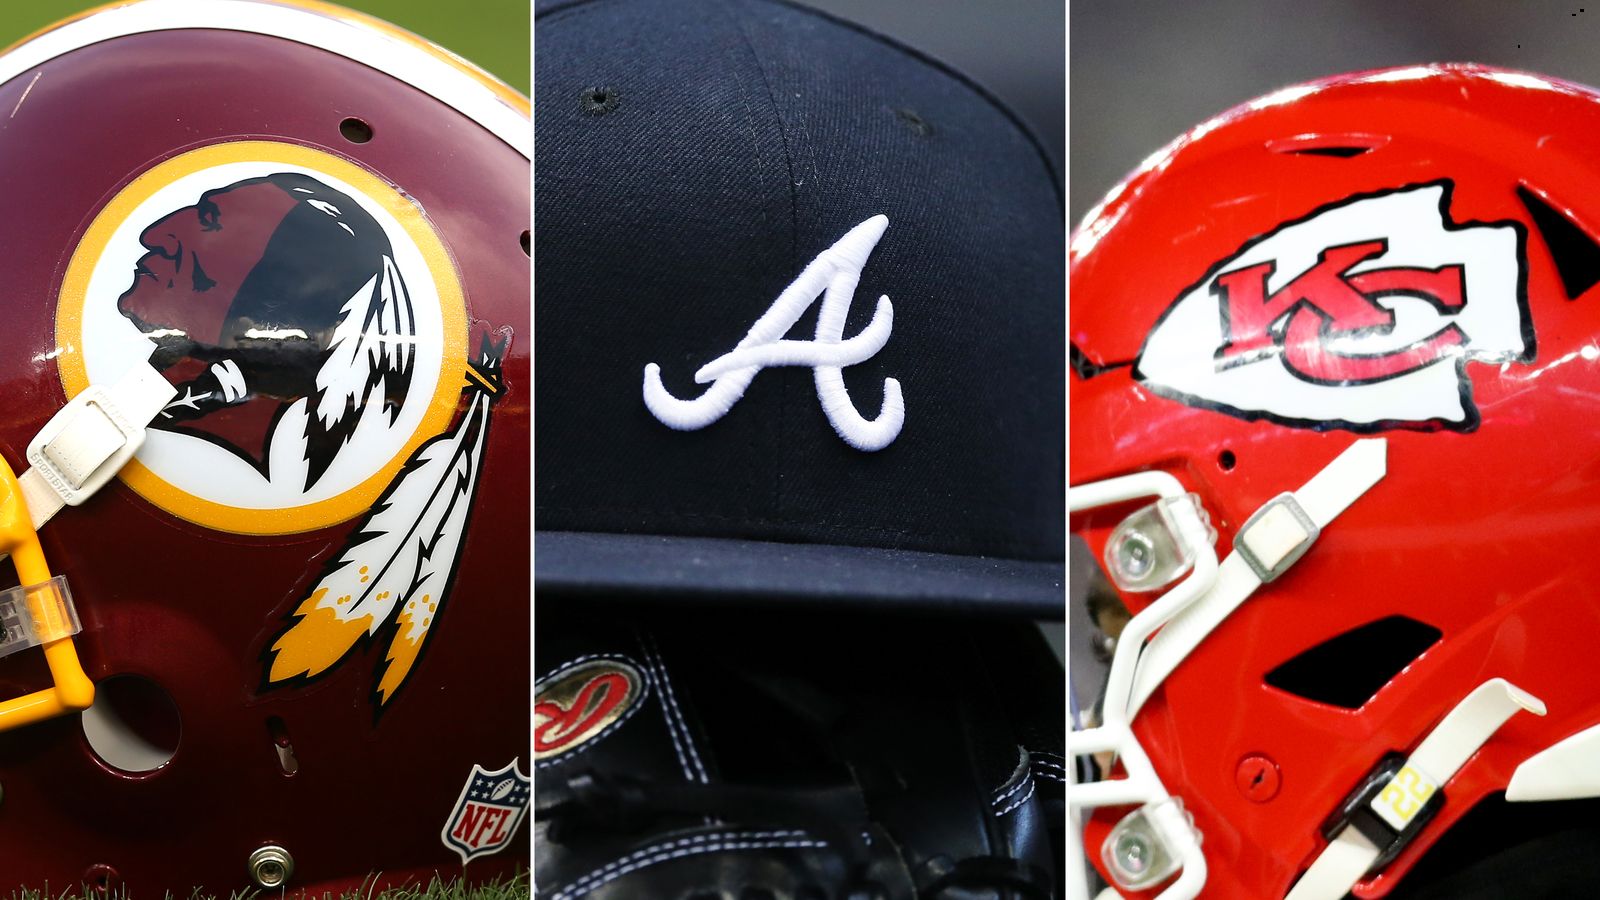 Sports teams that retired Native American mascots, nicknames